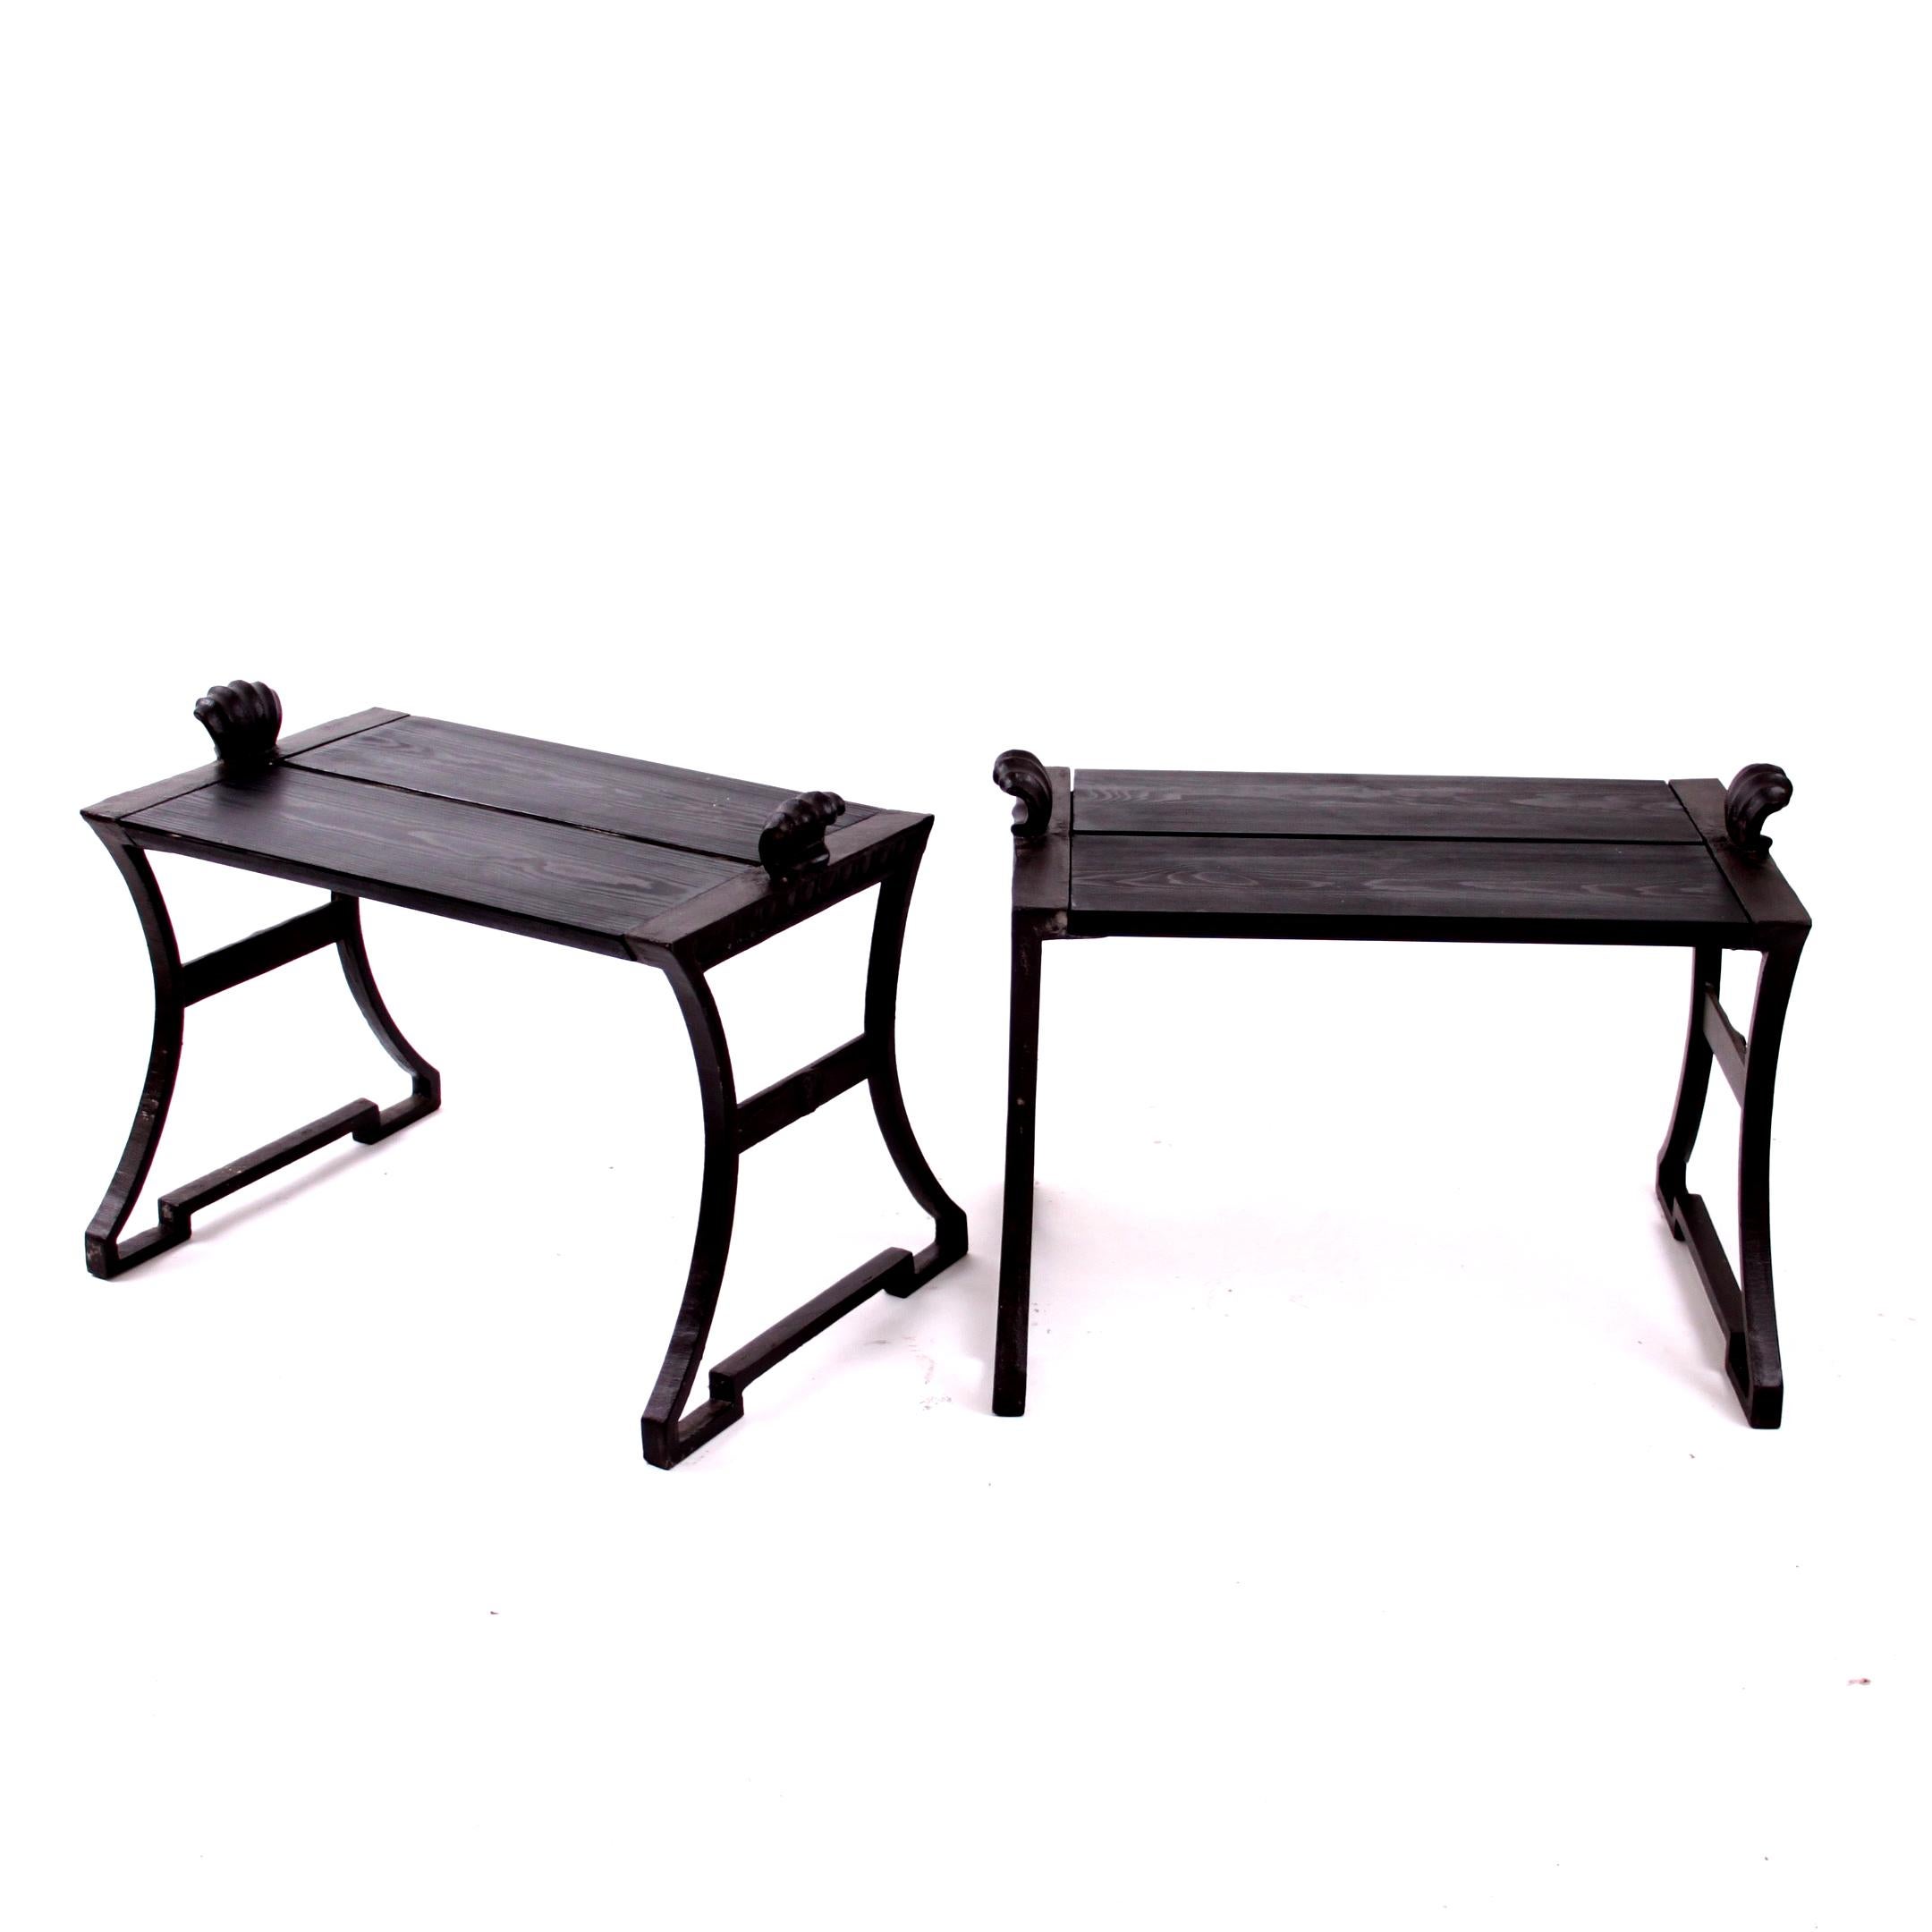 Swedish Pair of Folke Bensow Benches, Dessin Park Bench No. 1, Sweden For Sale